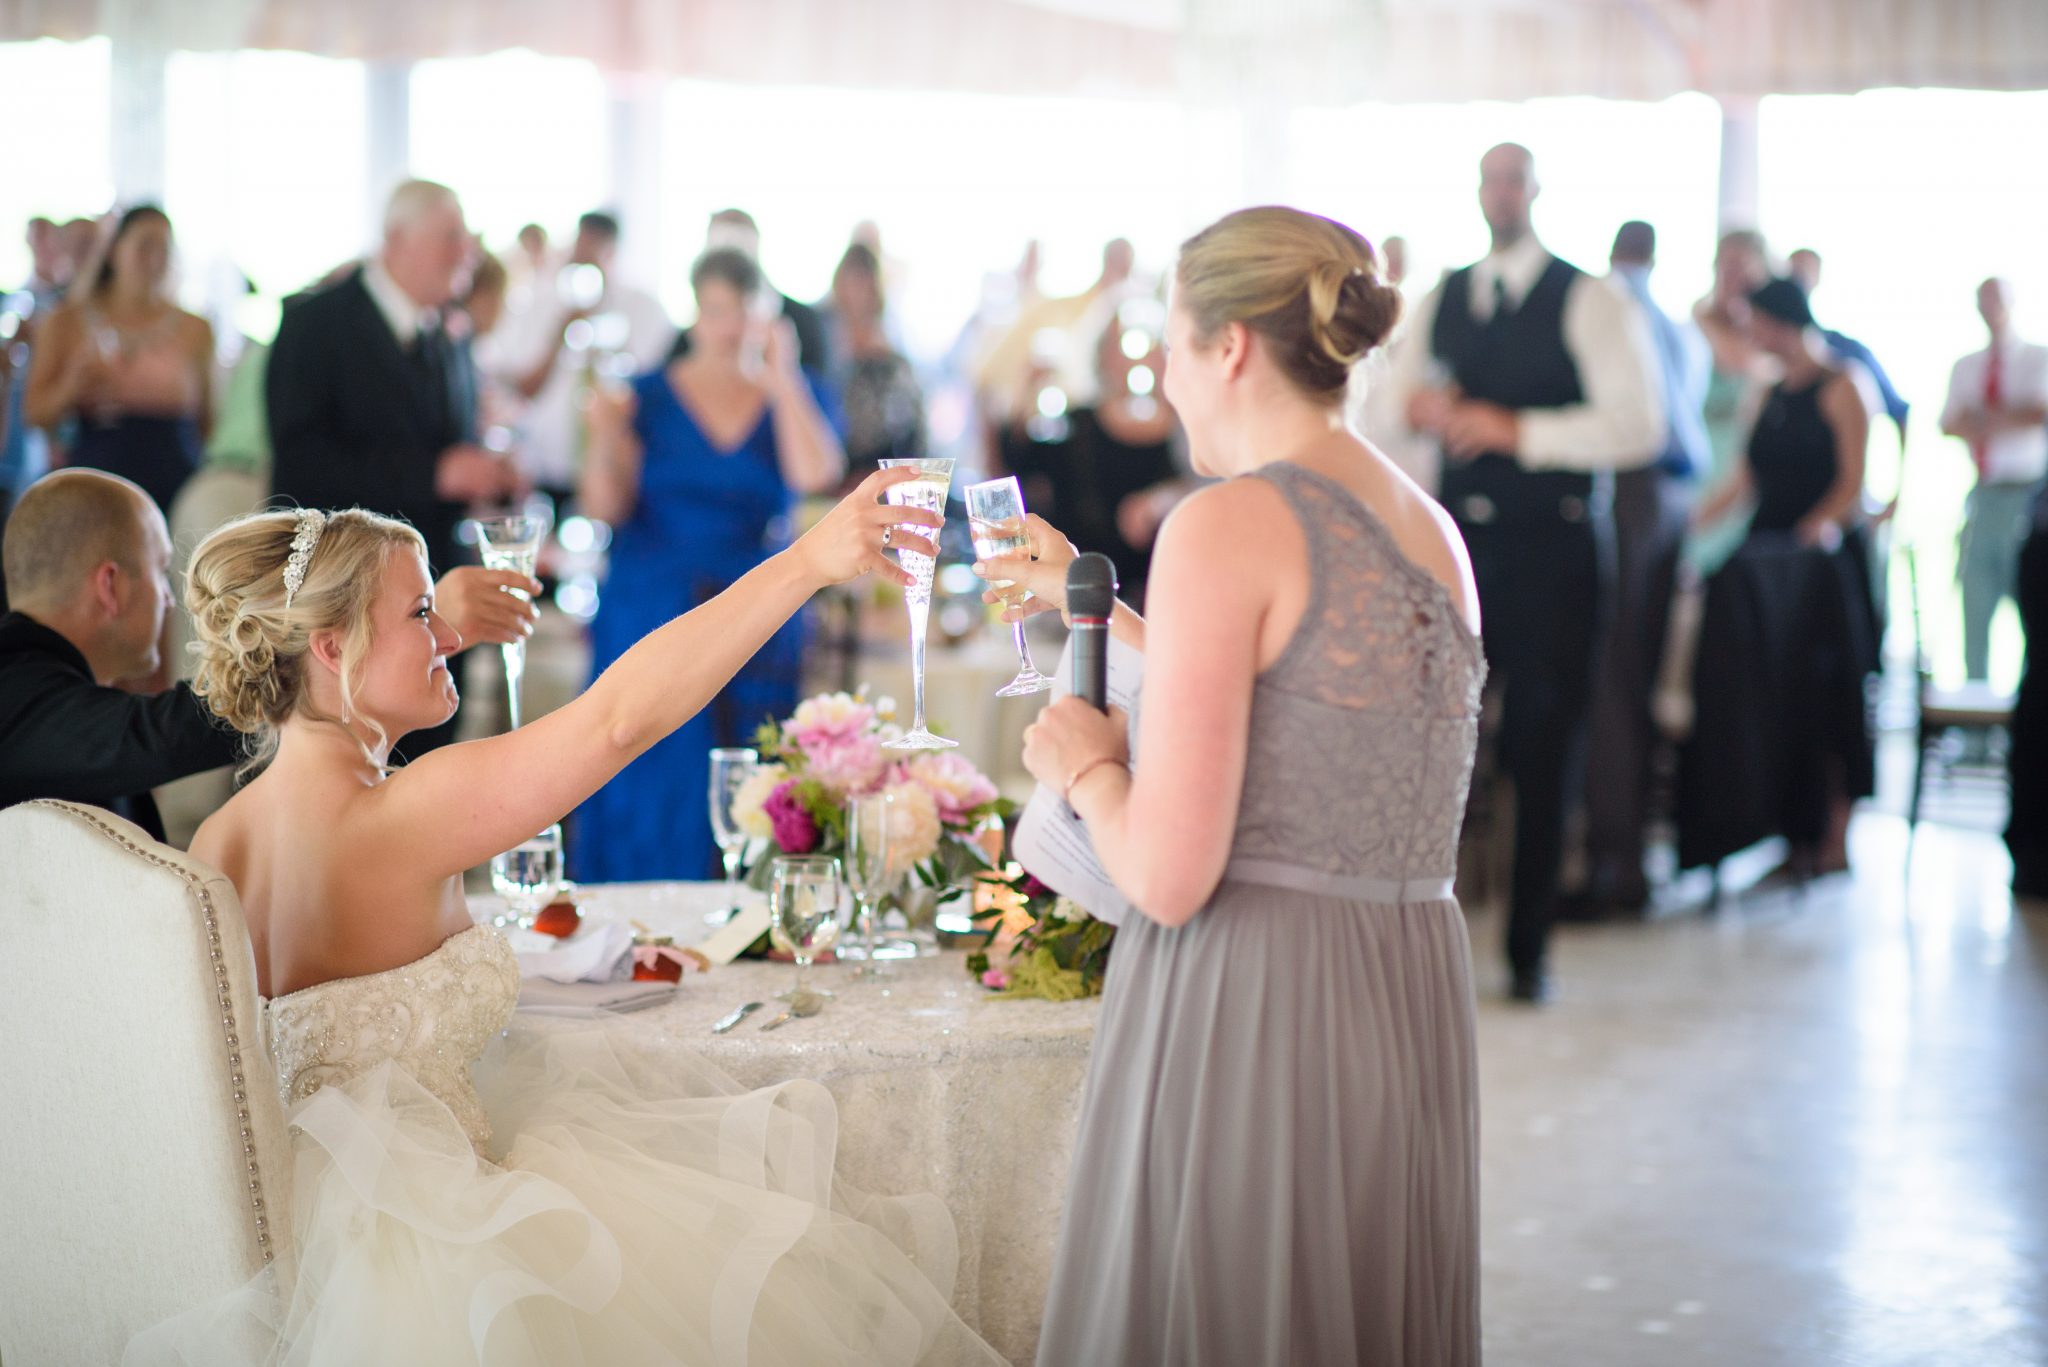 Maid of honor giving toast